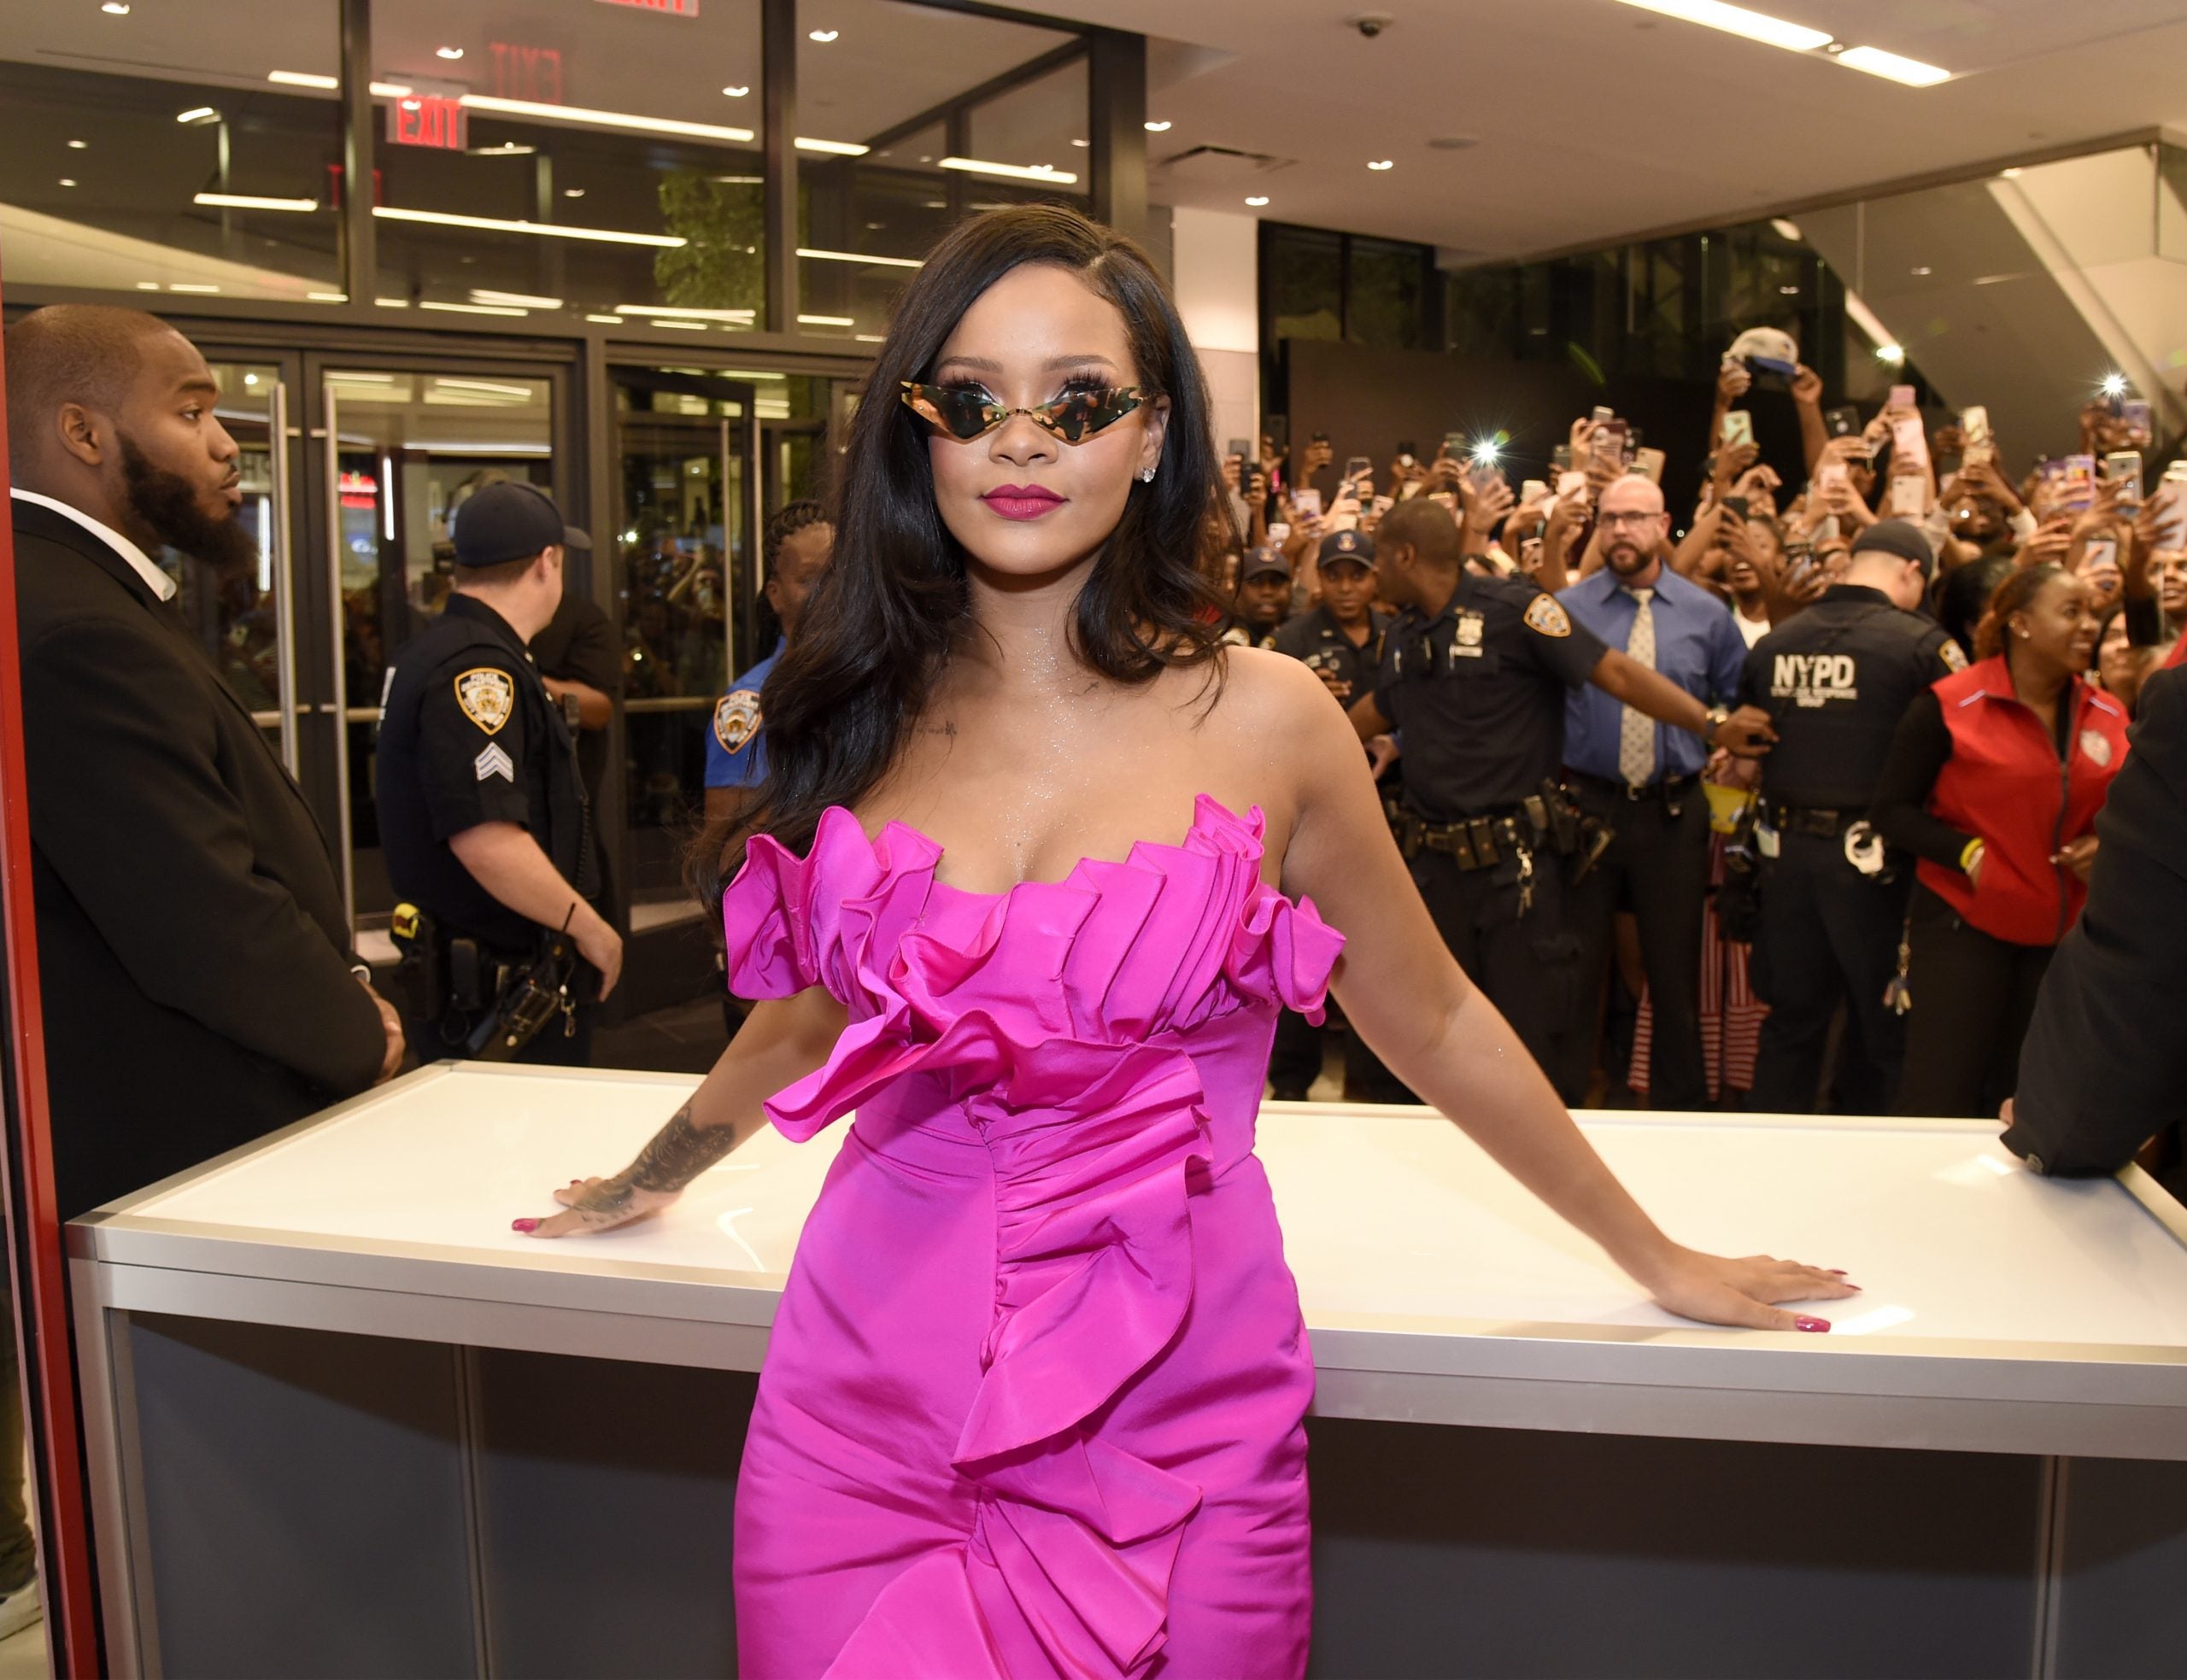 15 Of Rihanna's Best Fashion Moments From The Past Year